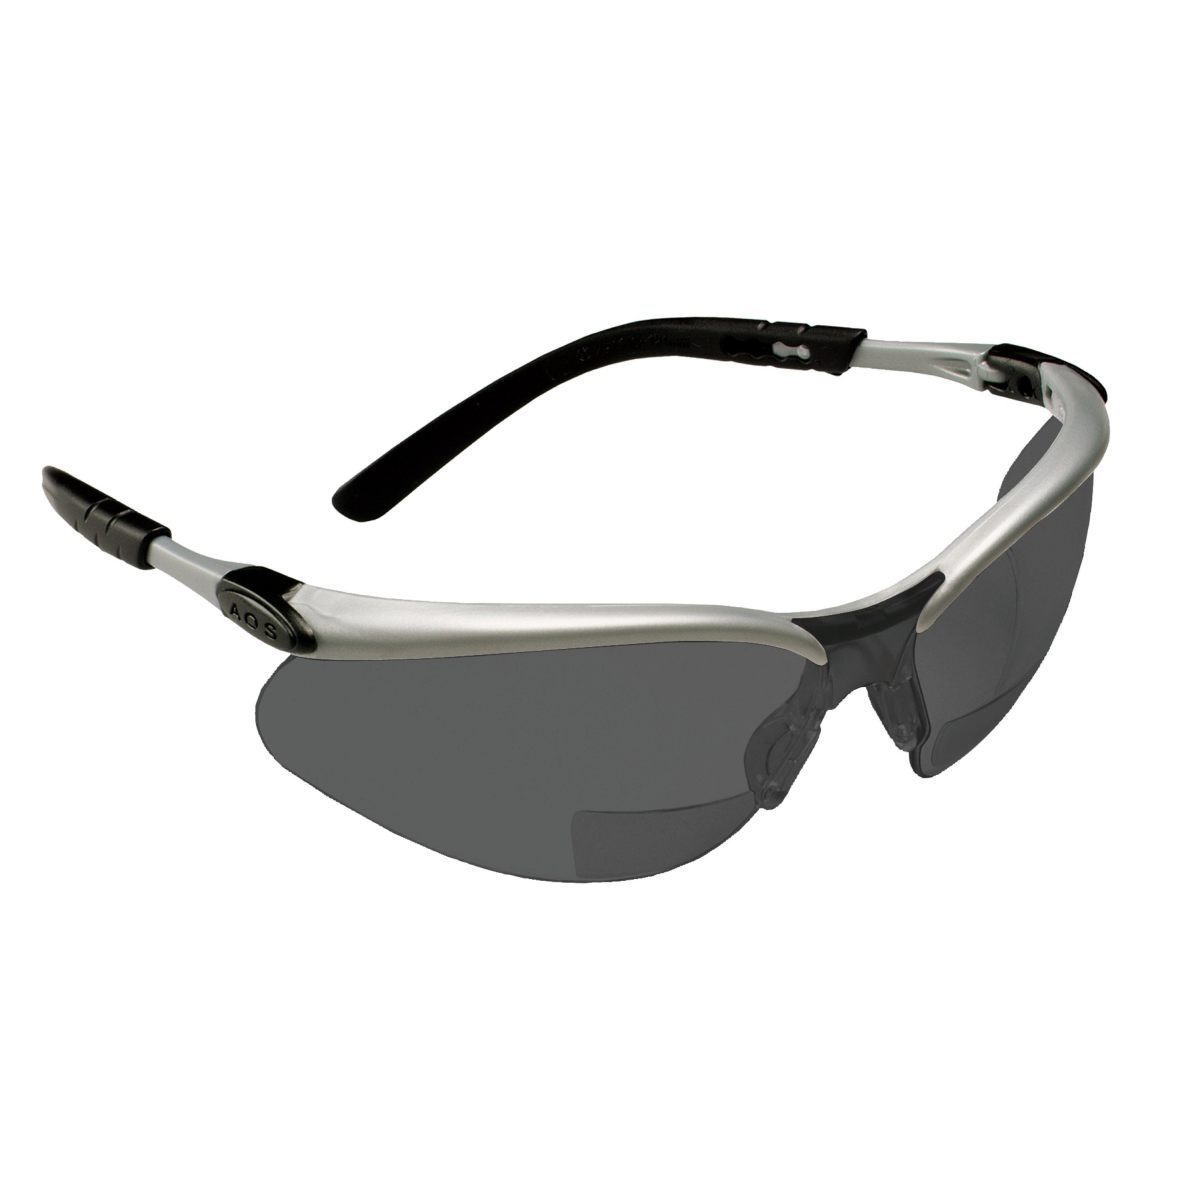 3M™ BX™ Reader Protective Eyewear 11378-00000-20 Gray Lens, Silver Frame, +2.0 Diopter (Availability restrictions apply.)